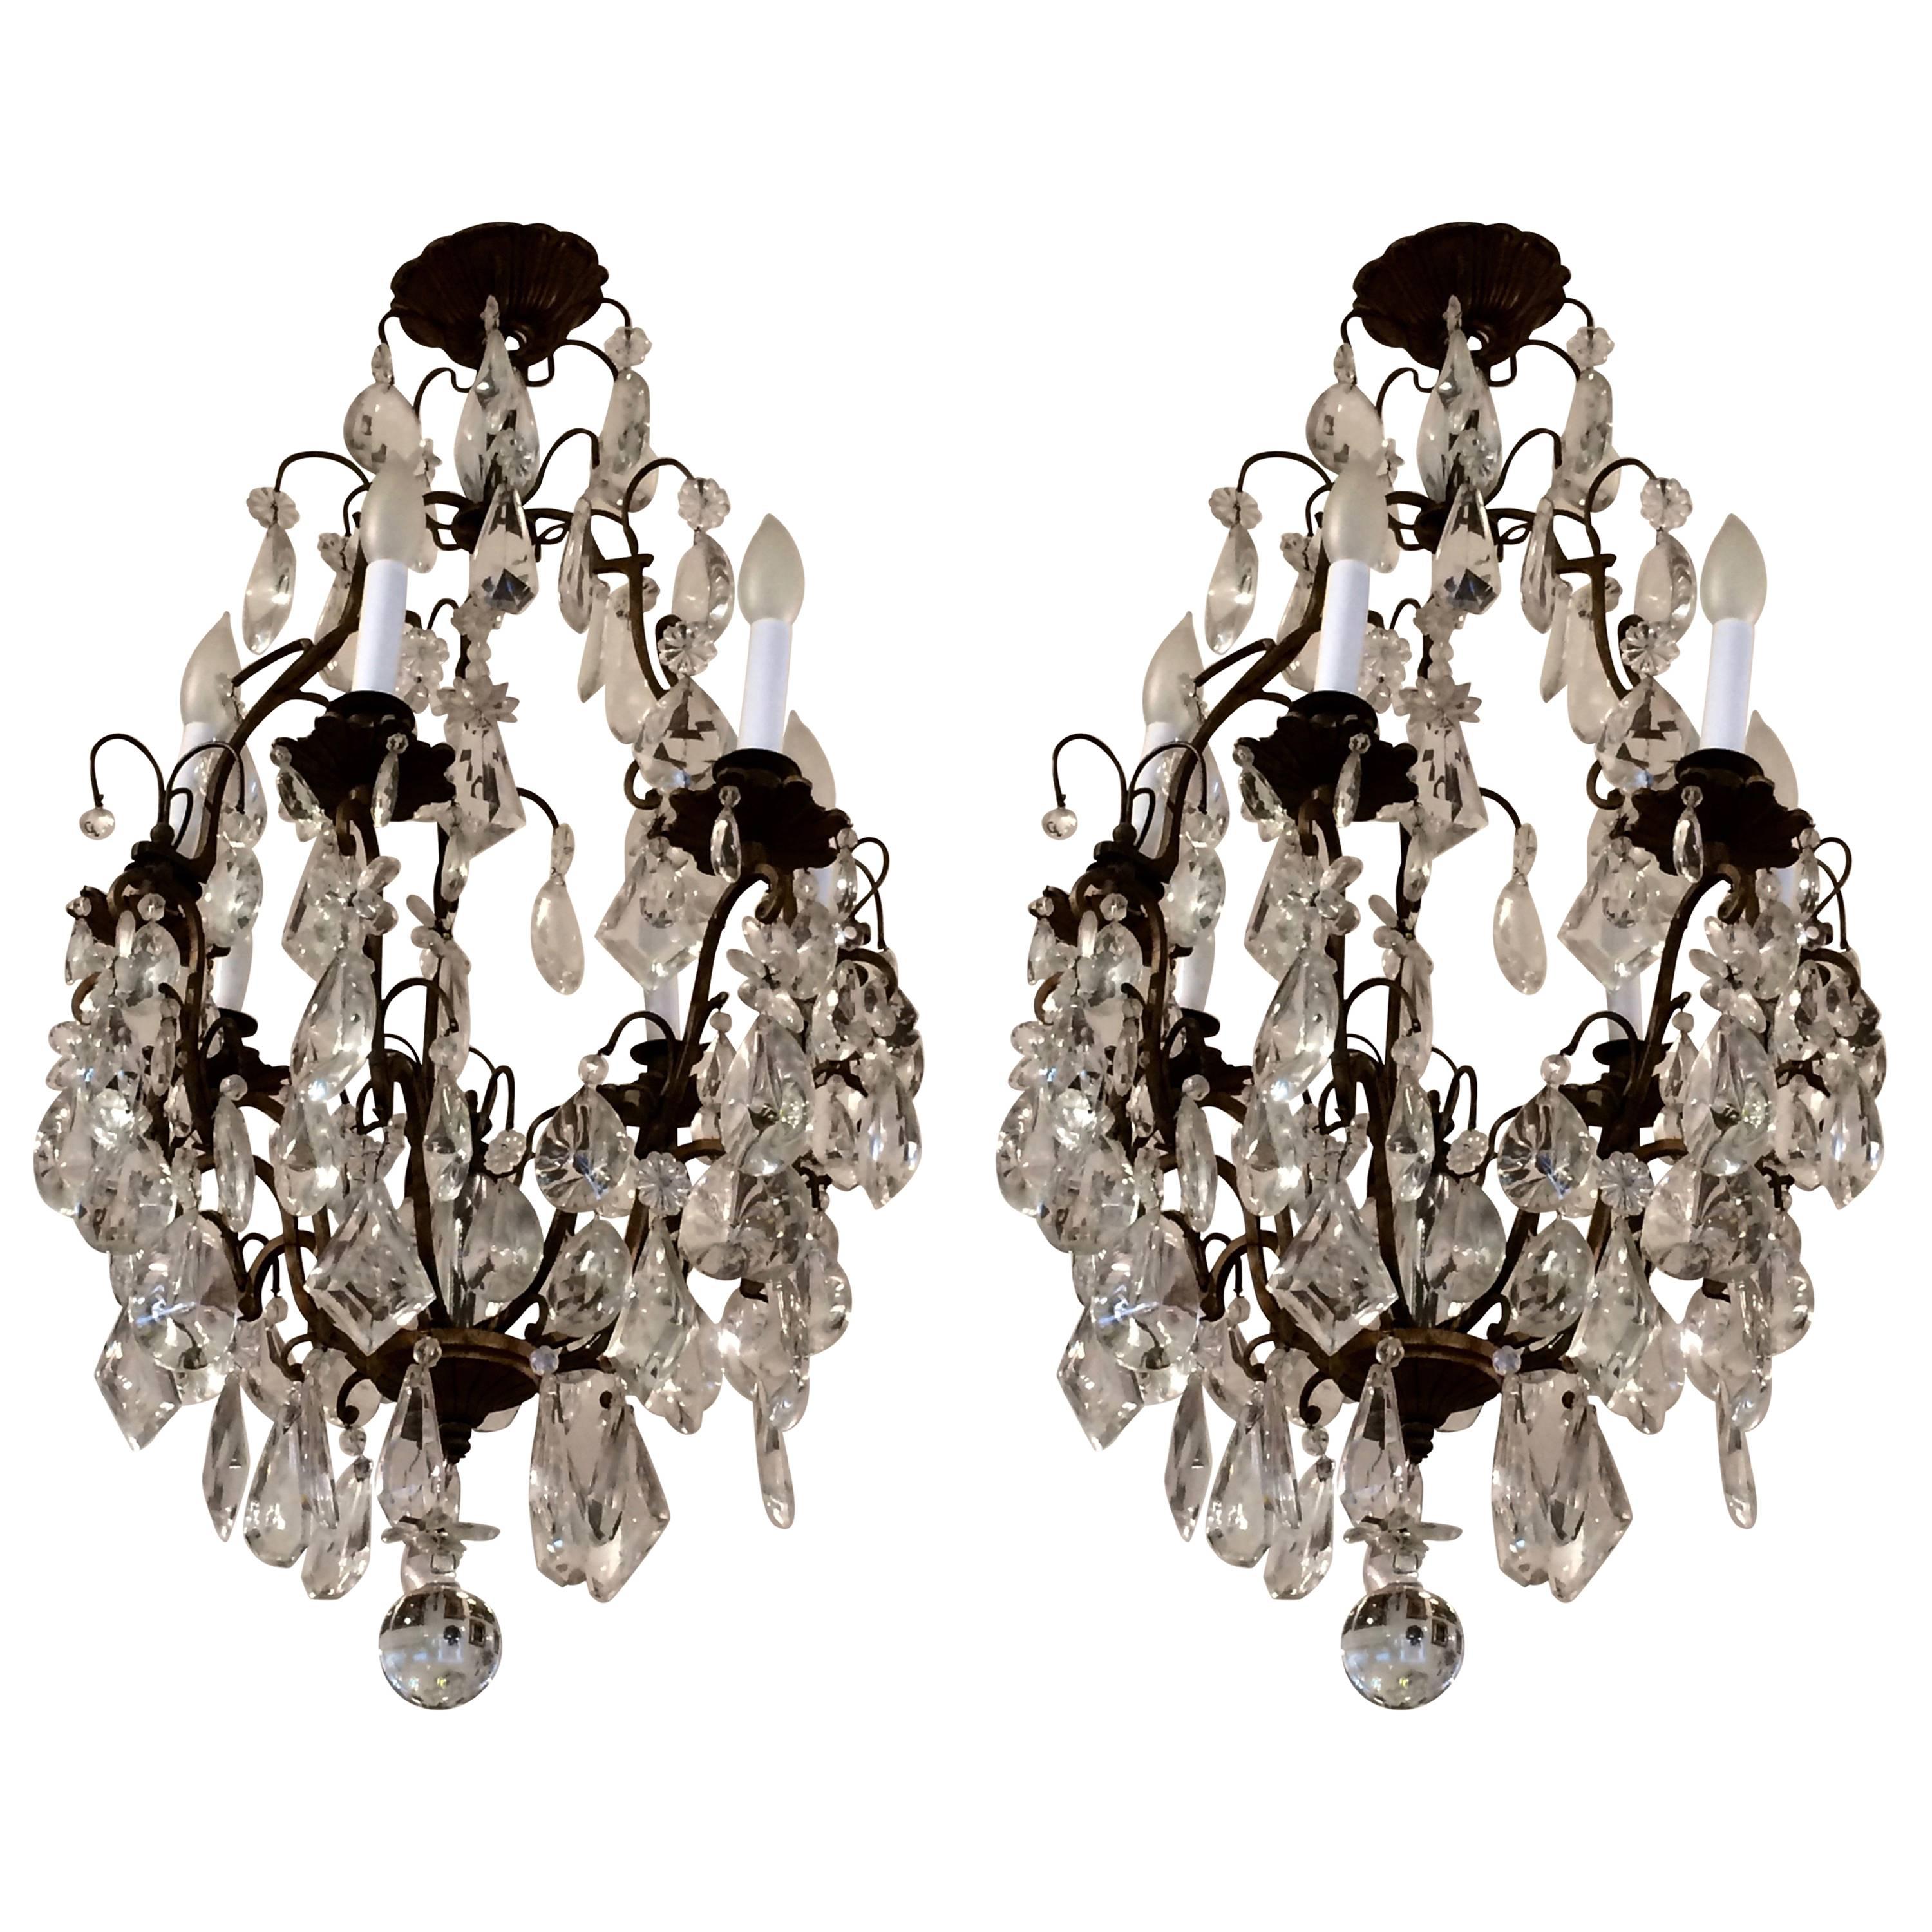 Matching Pair of Glitzy French Gilt Metal and Cut Glass Chandeliers